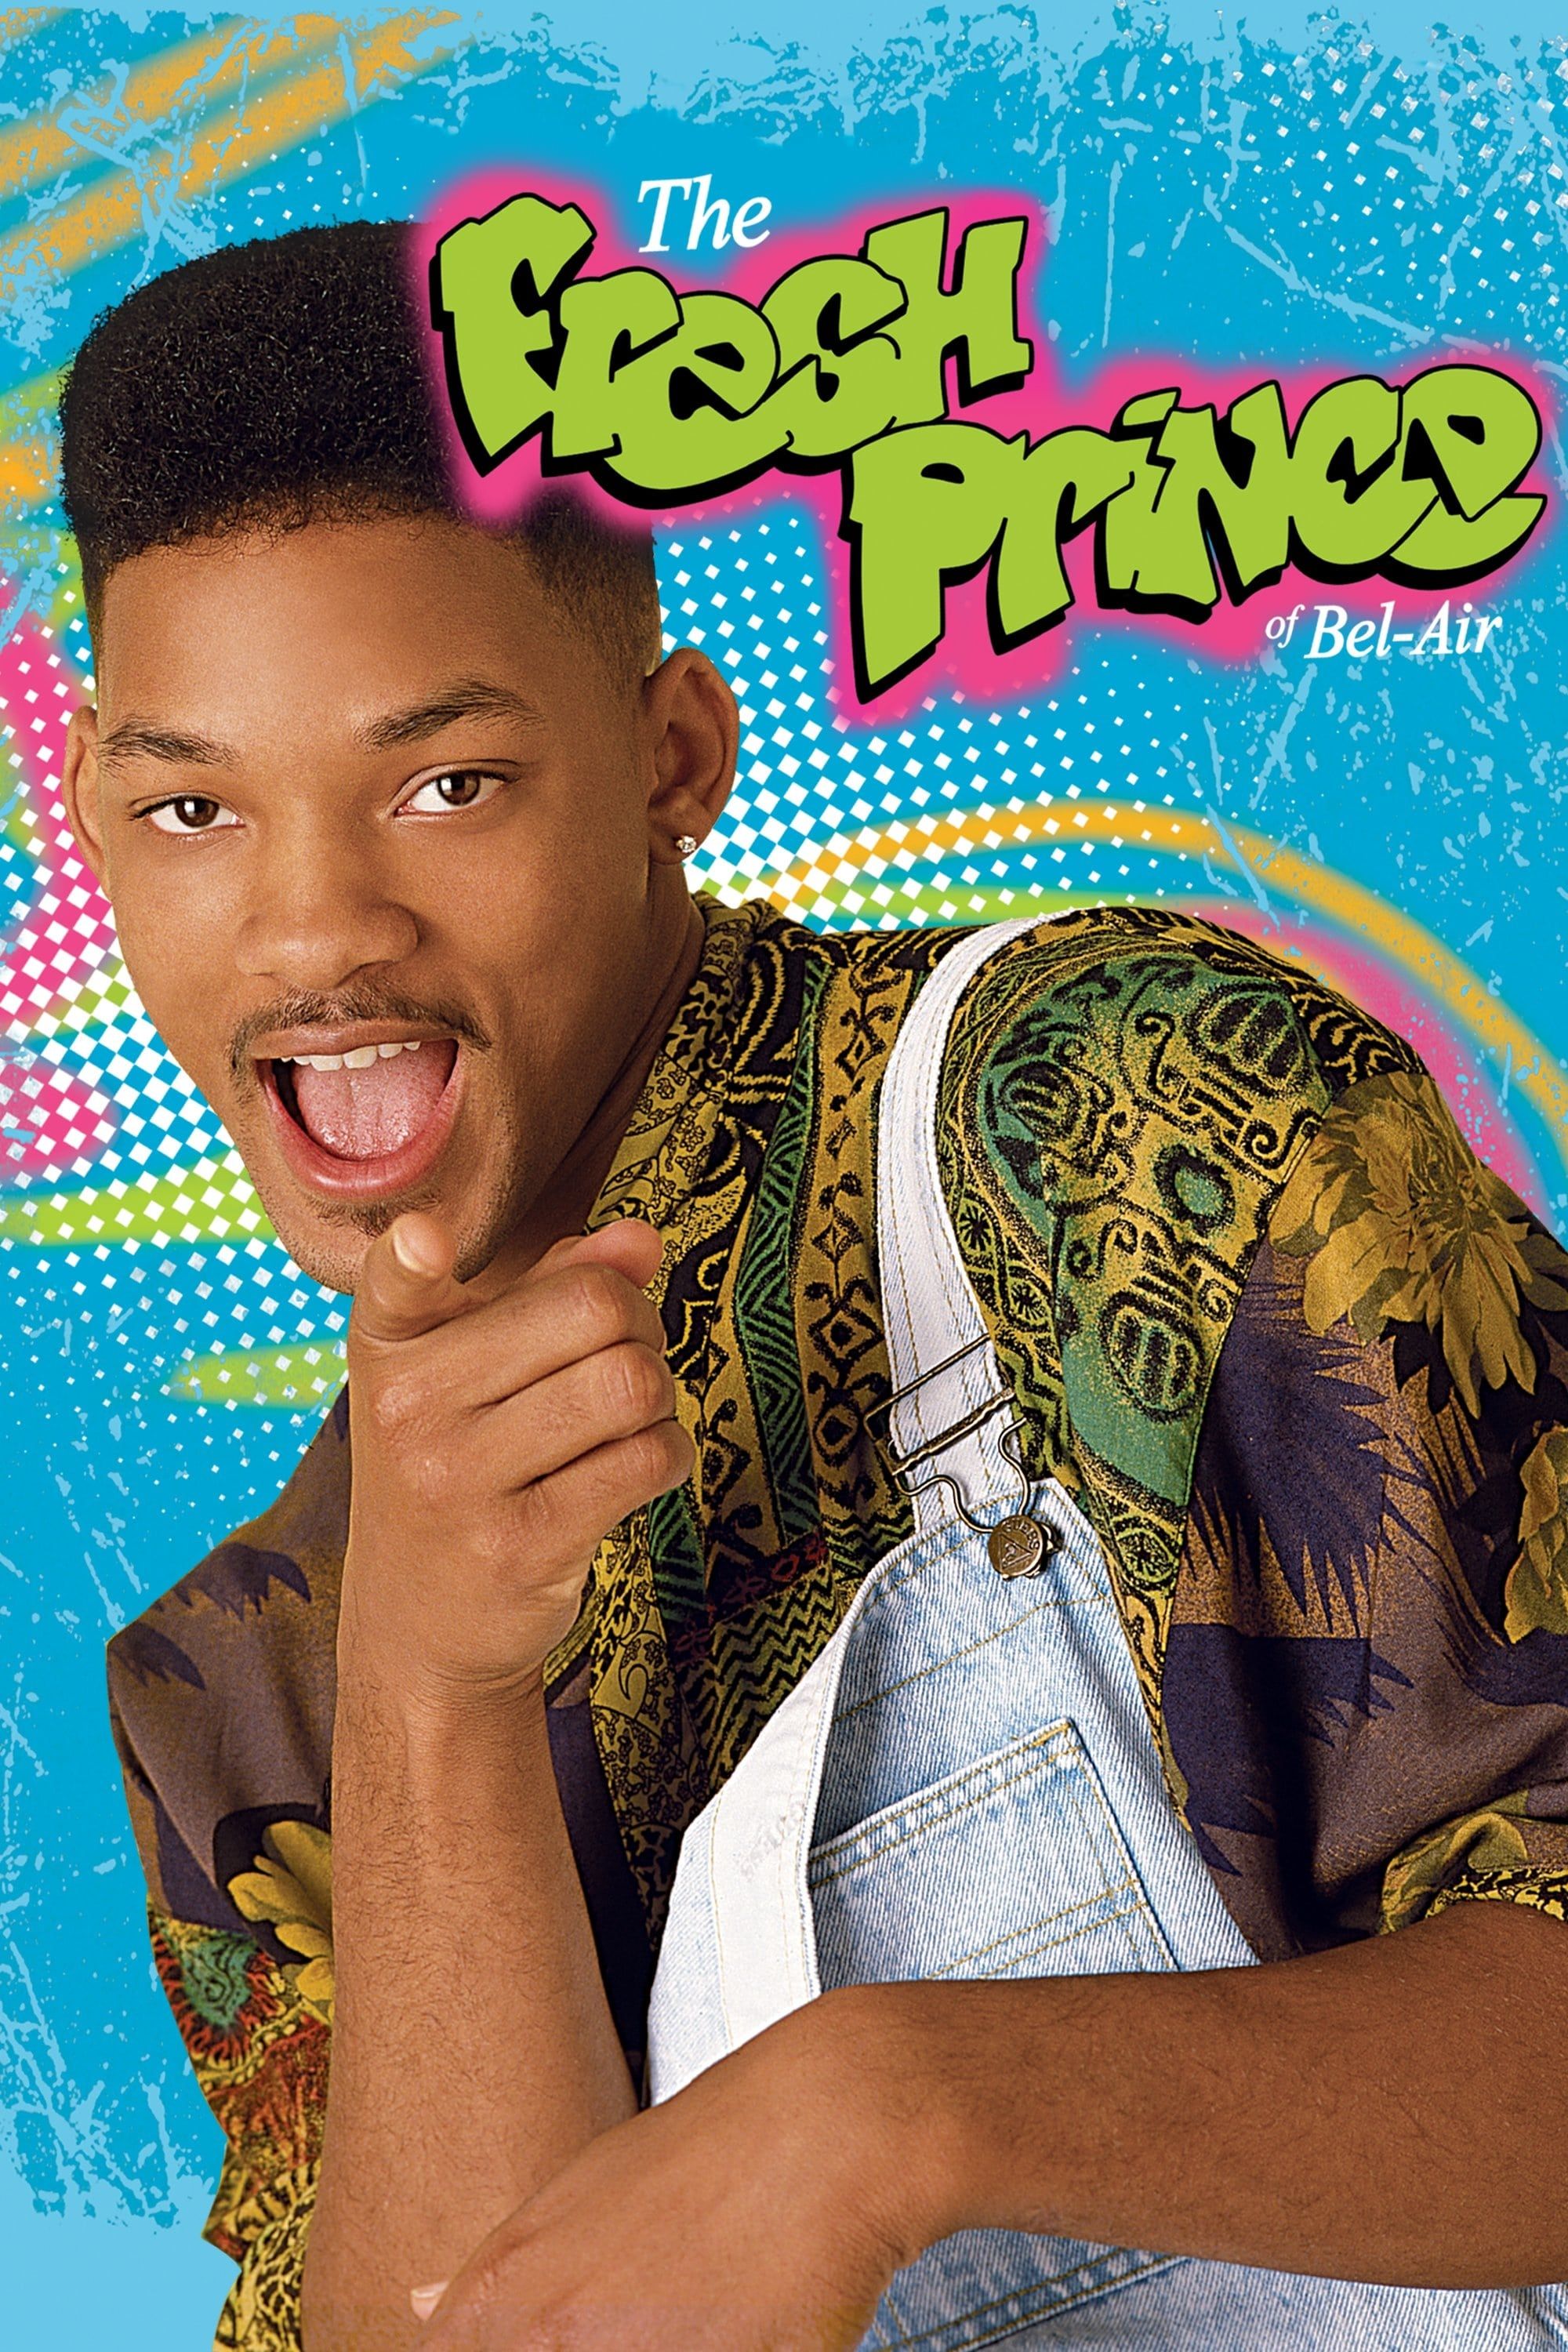 The Fresh Prince of Bel-Air poster with Will Smith